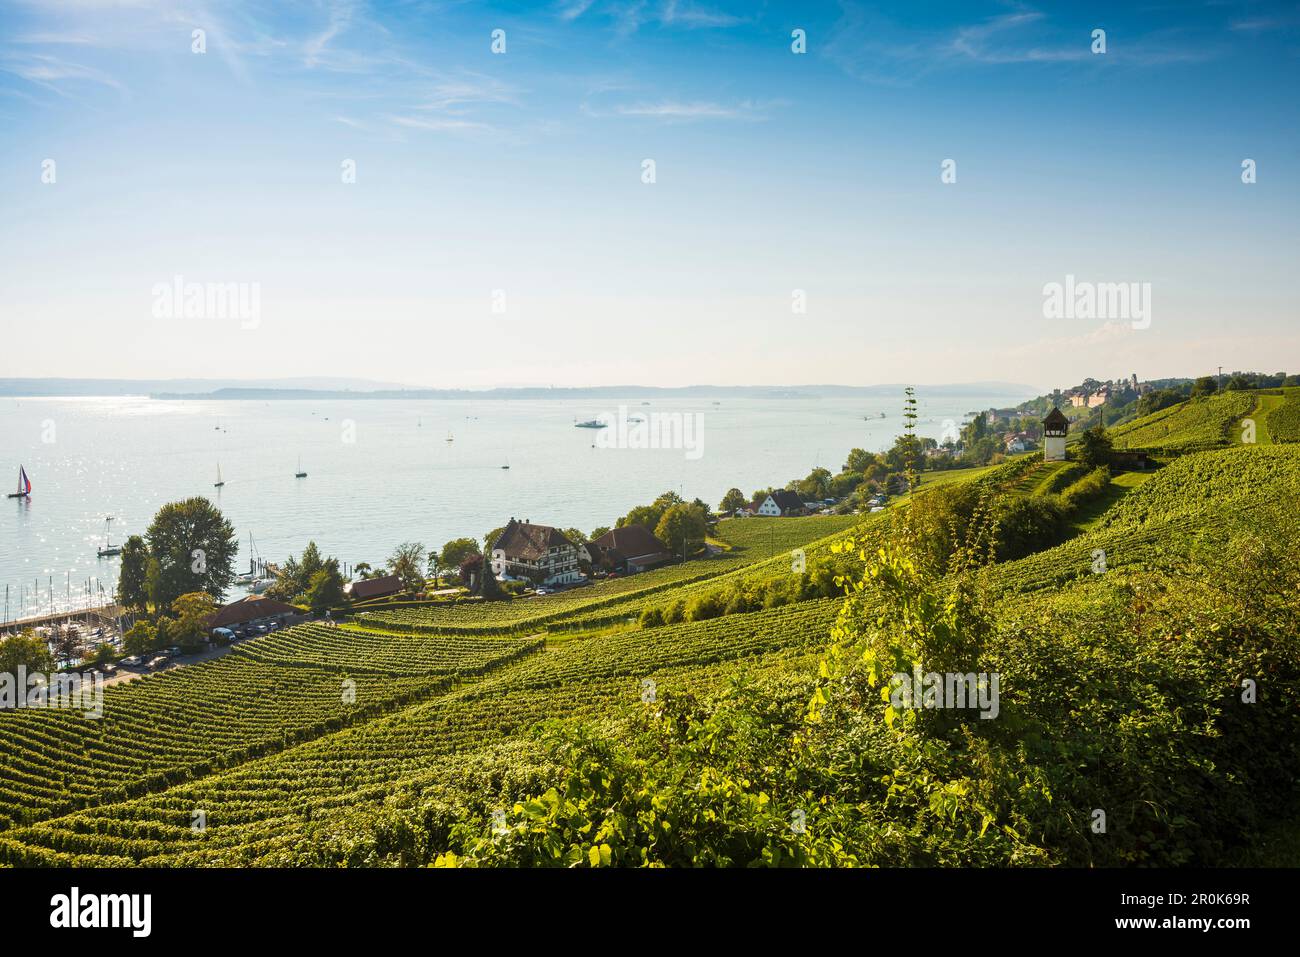 Historic Rebgut Haltnau vineyard on Lake Constance, with the town of Meersburg am Bodensee on the right, Lake Constance, Meersburg, Baden-Württemberg, Stock Photo